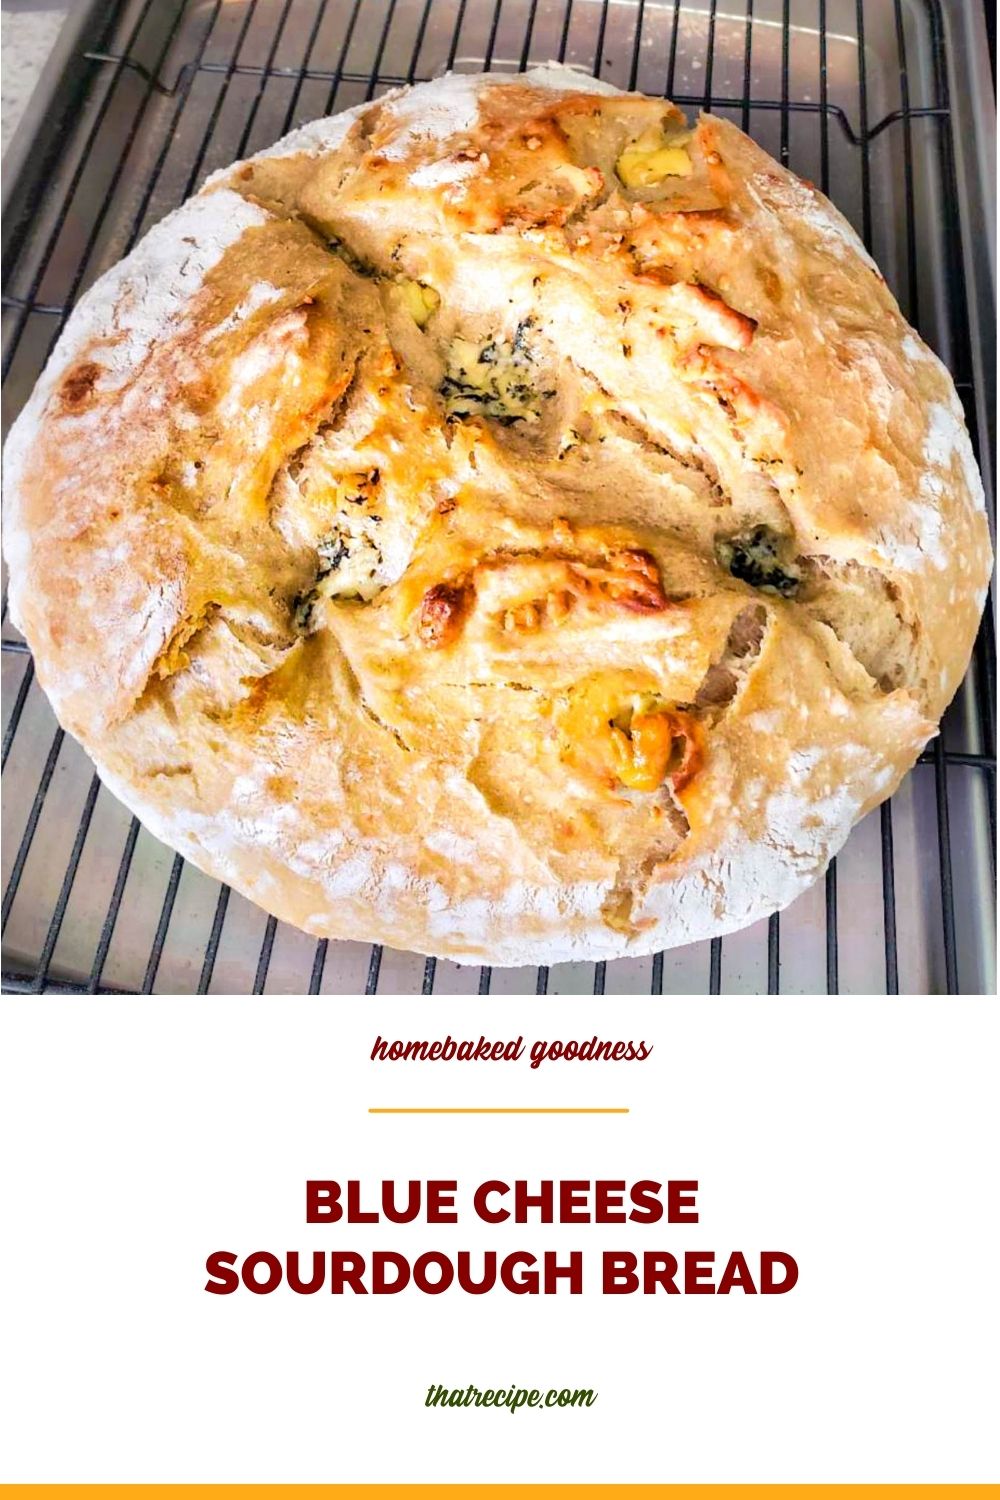 loaf of artisan bread with text overlay "blue cheese sourdough bread